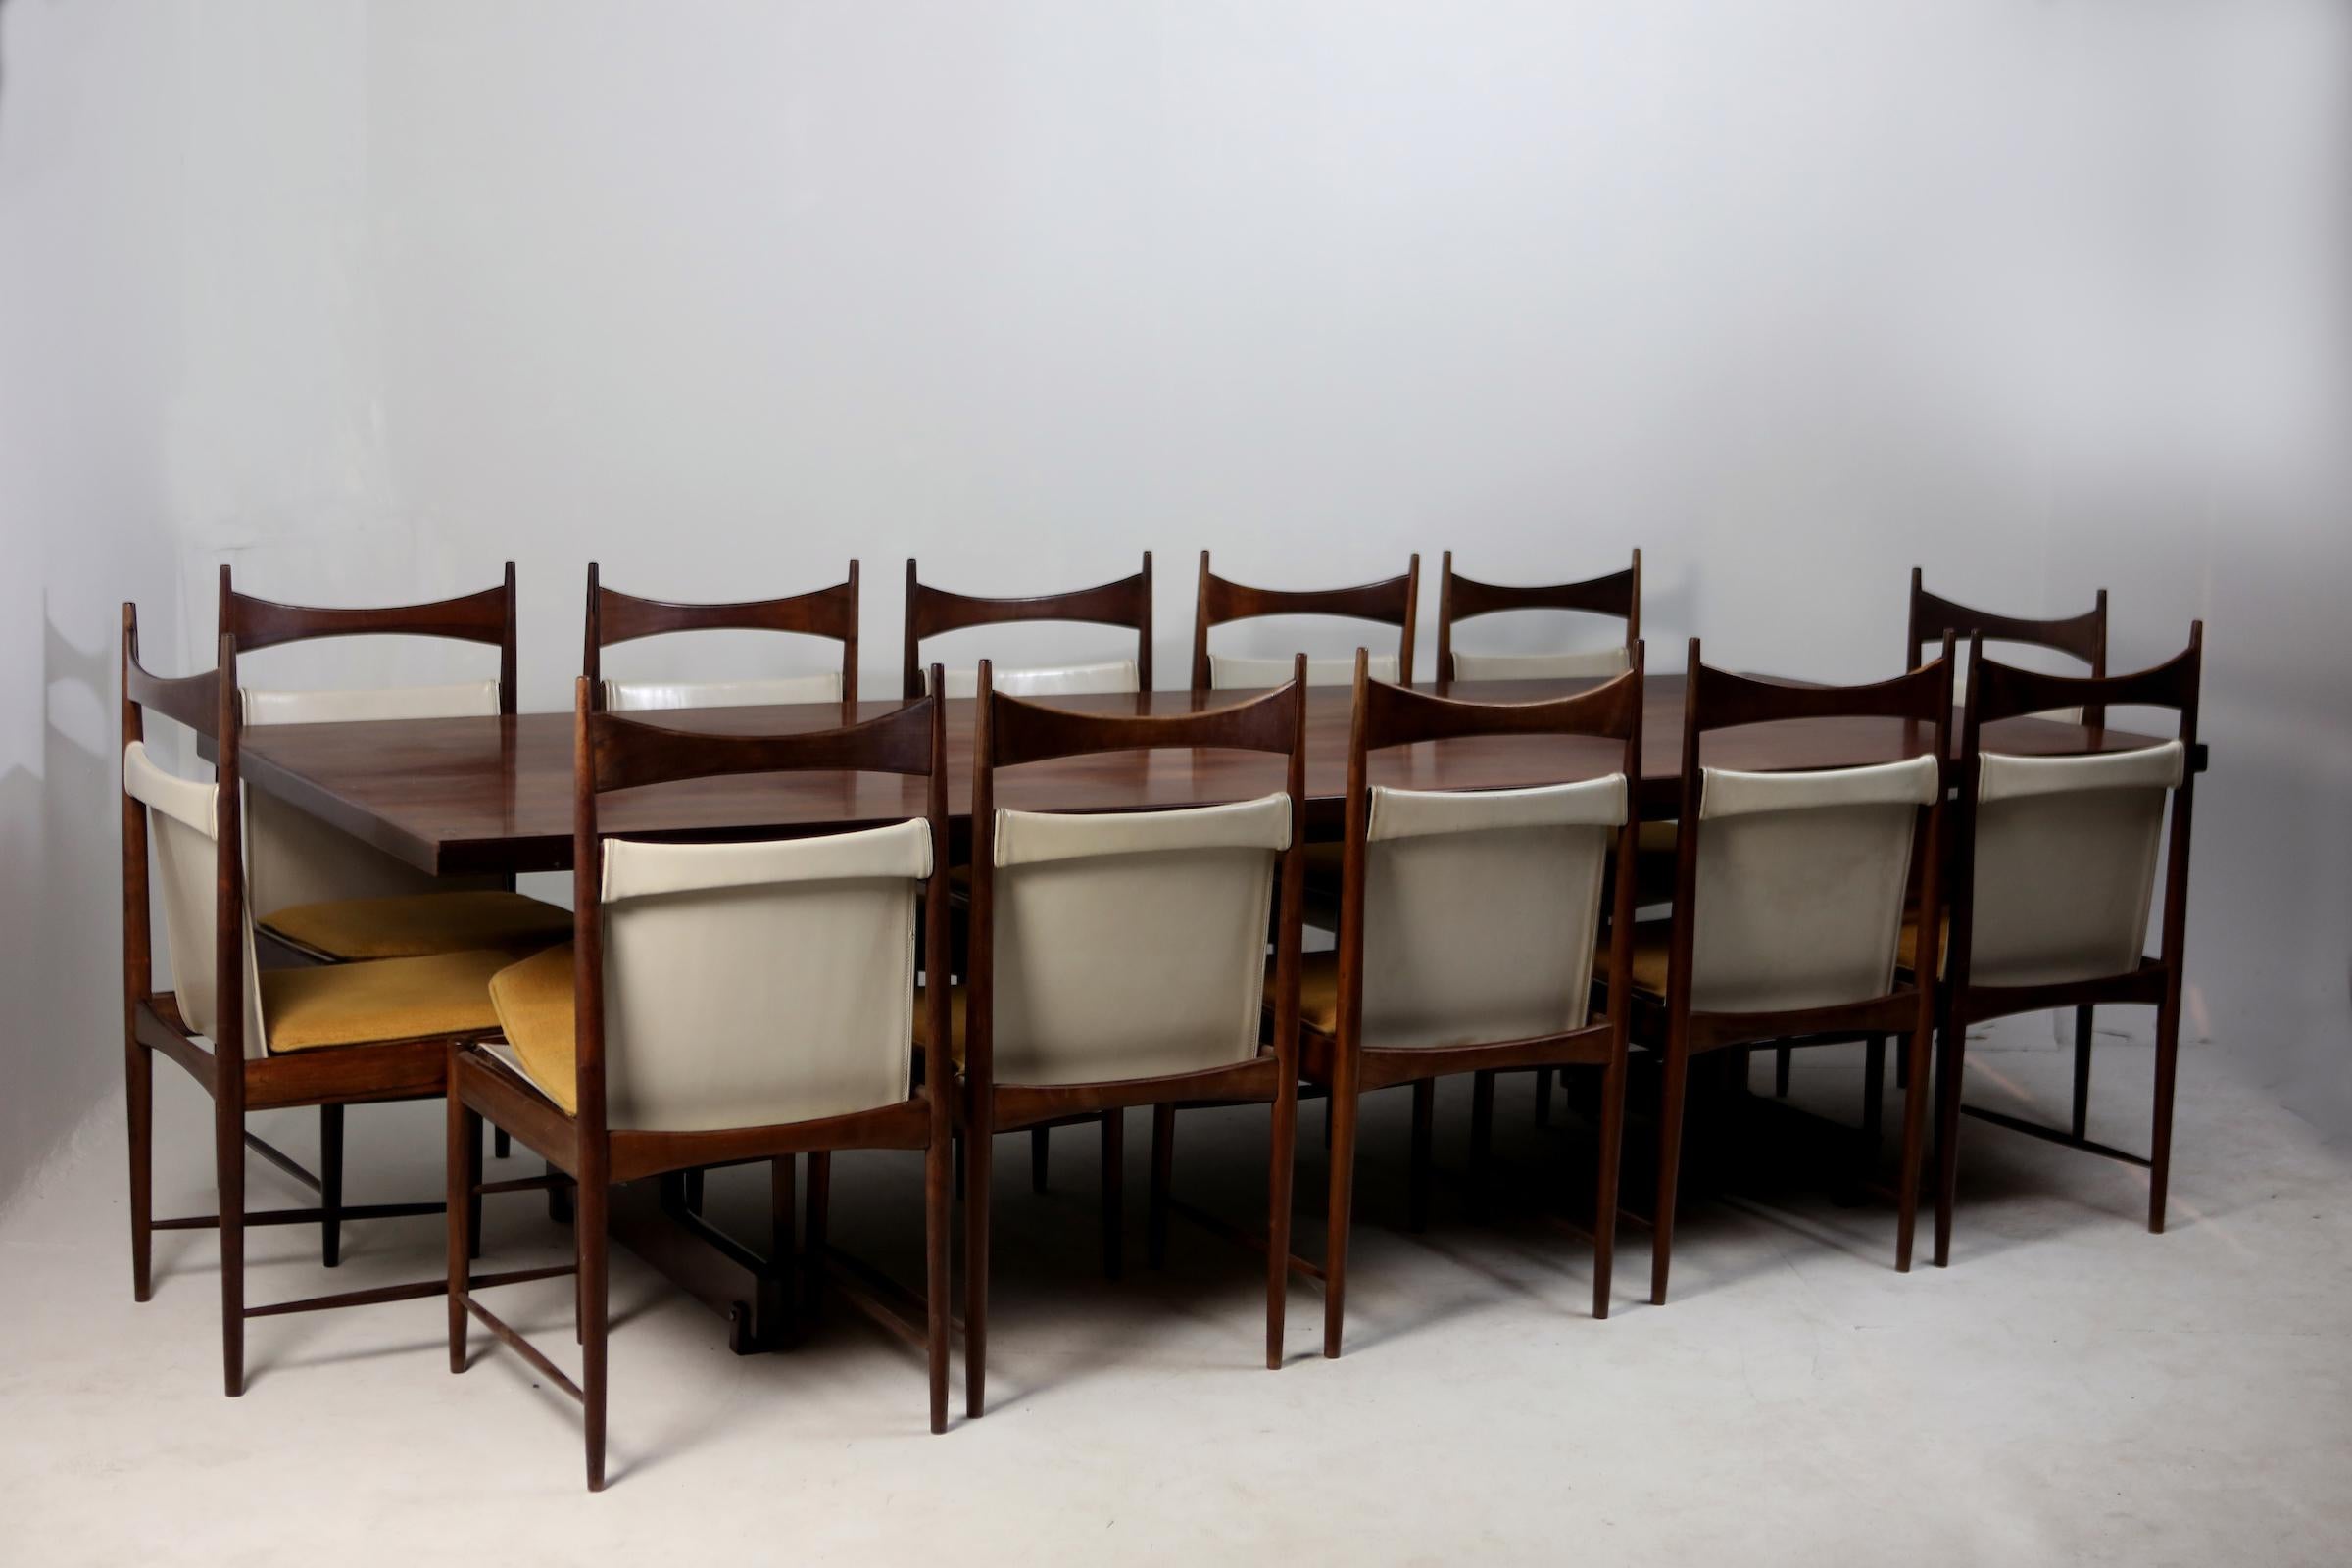 Varnished Mid-Century Modern Set of Dining Table with Chairs by Sergio Rodrigues, Brazil